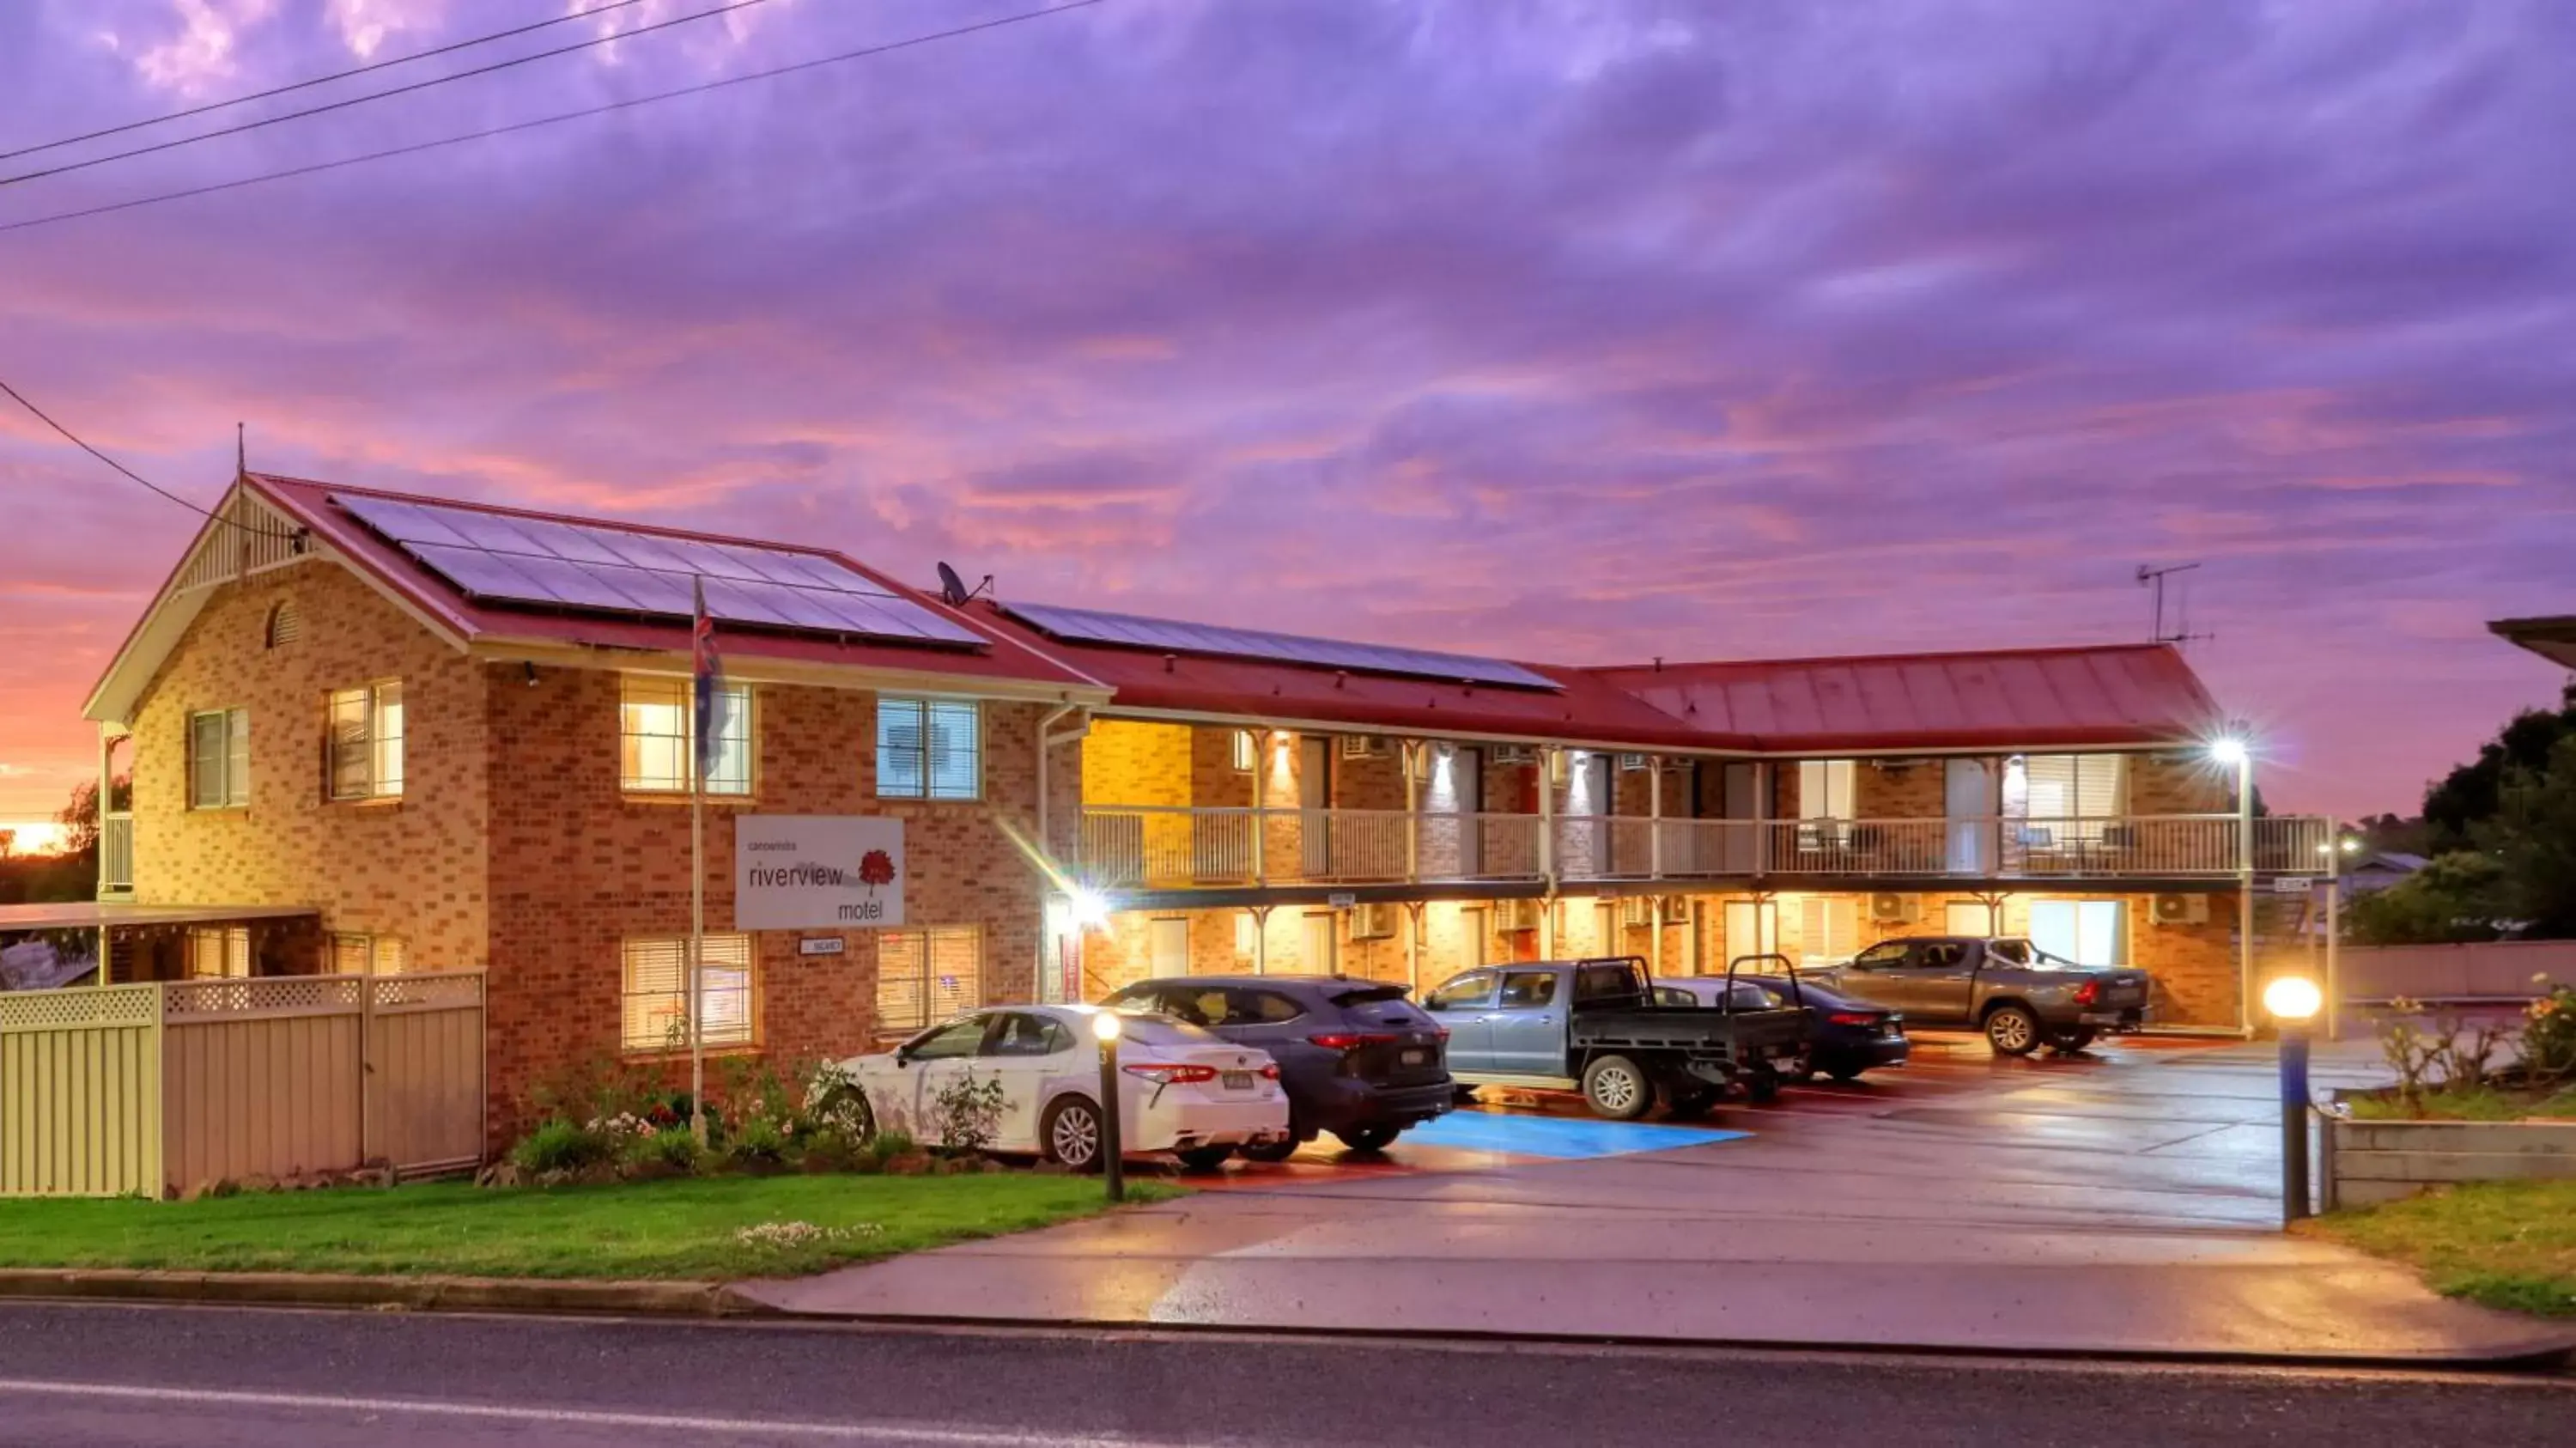 Sunset, Property Building in Canowindra Riverview Motel